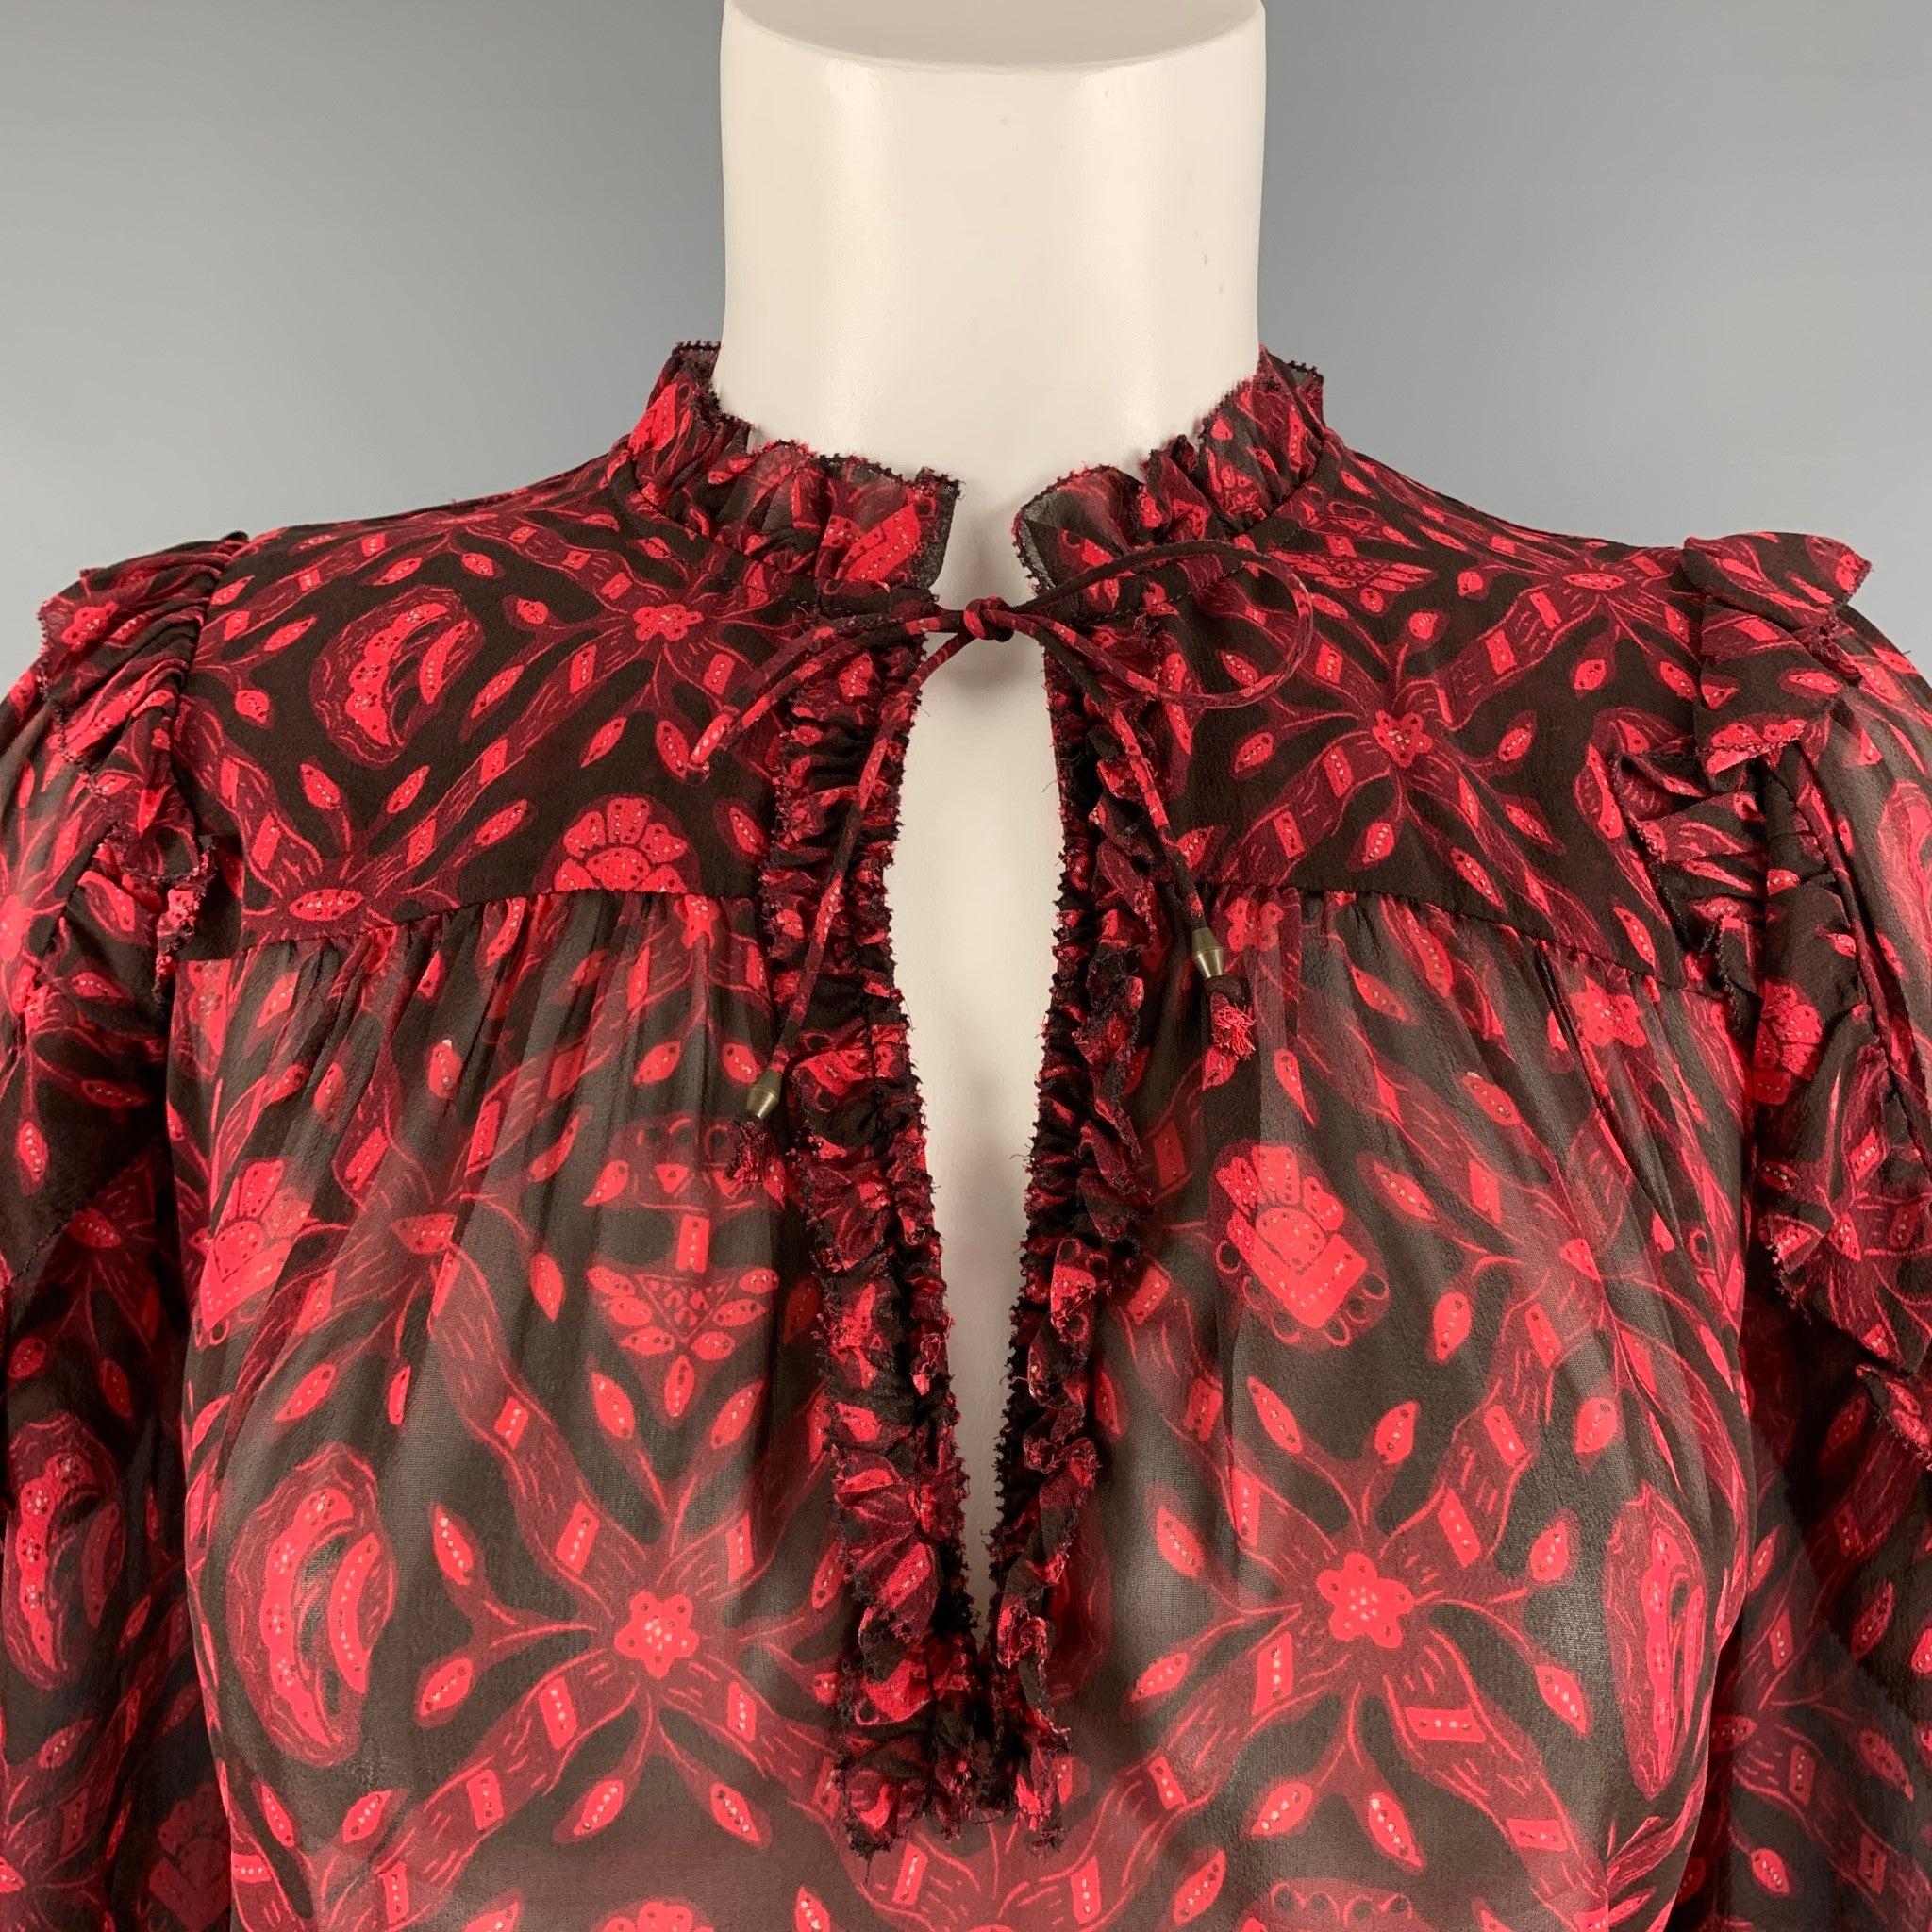 ULLA JOHNSON blouse comes in a red & black silk woven material featuring a oversized fit, long sleeve, V-neck, and ruffle details. Excellent Pre-Owned Condition. 

Marked:   2 

Measurements: 
 
Shoulder: 13 inches Bust: 47 inches Sleeve: 21.5